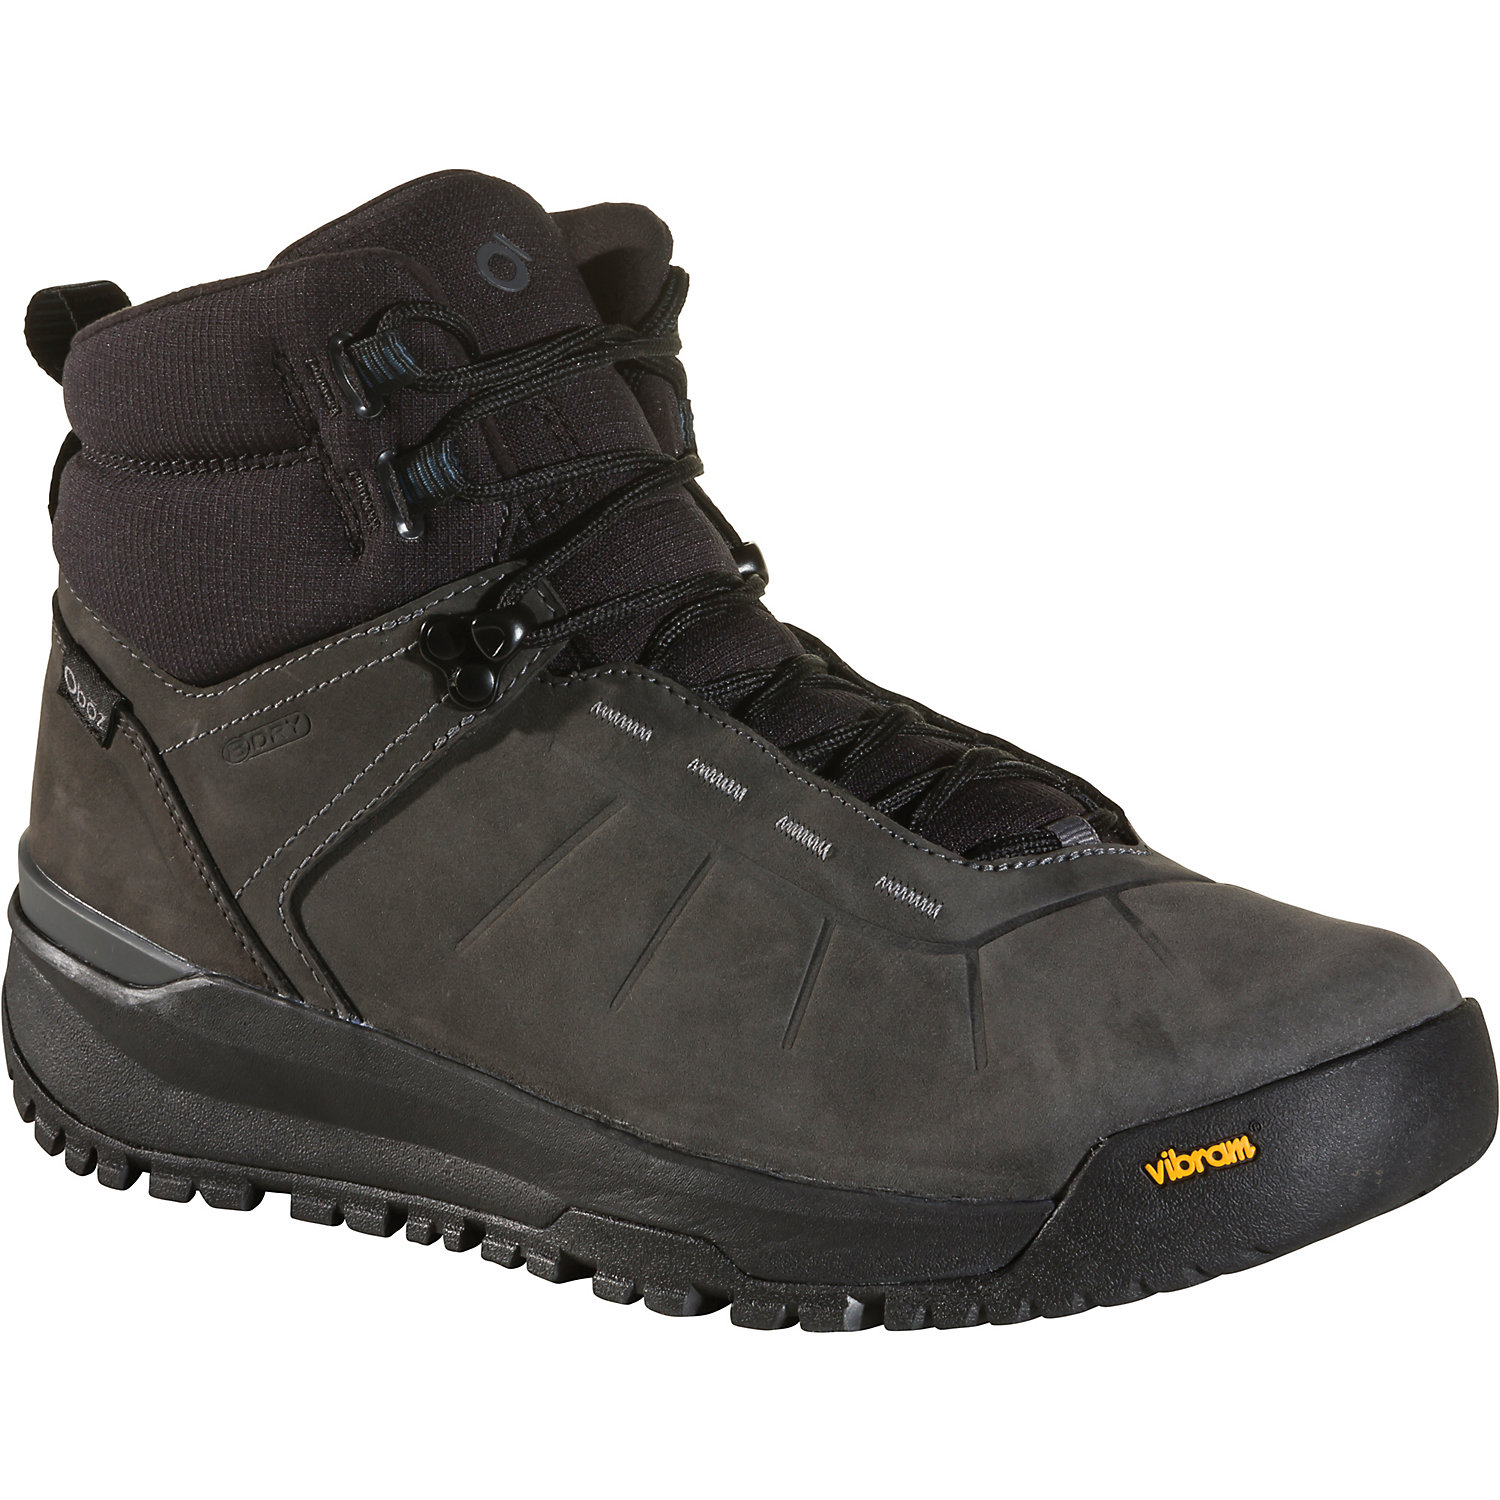 Oboz Mens Andesite Mid Insulated B-Dry Shoe